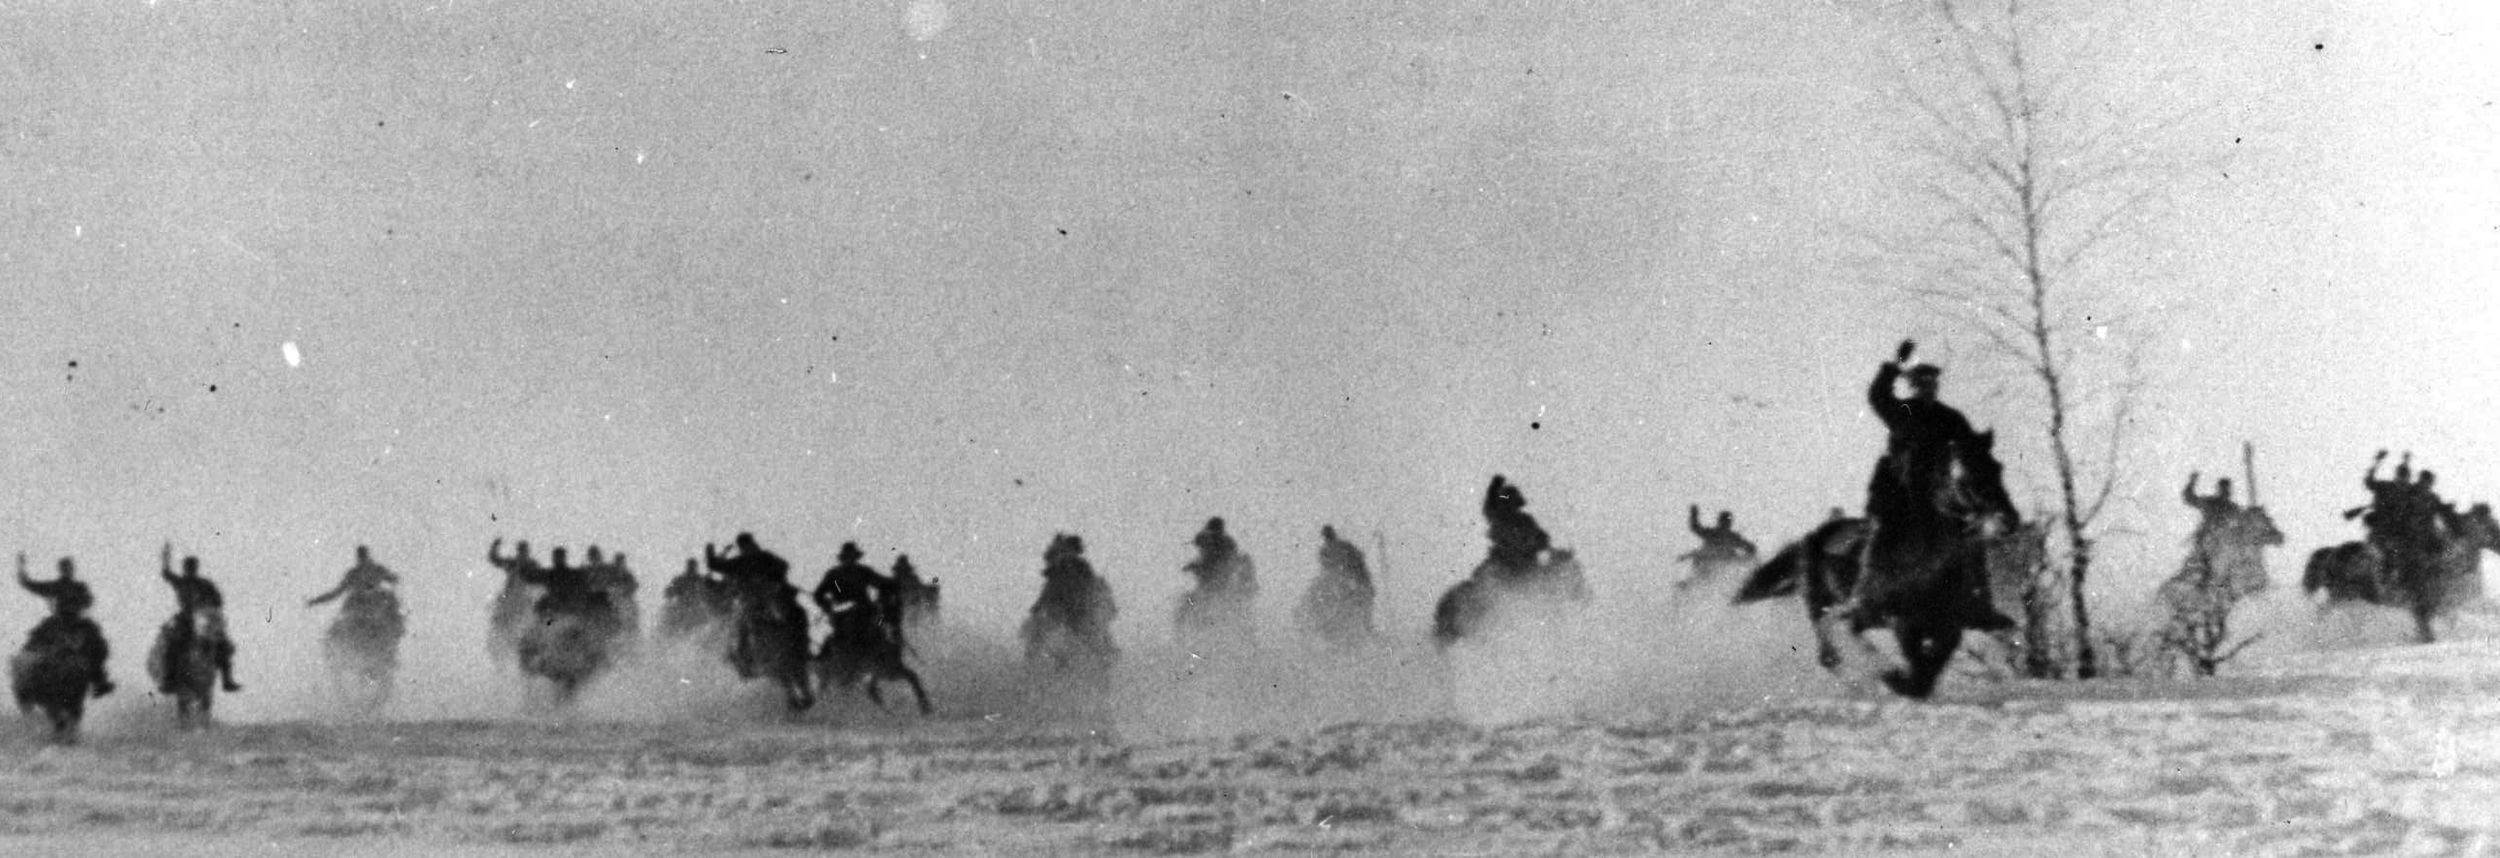 A magnificent anachronism by World War II, a Red Army cavalry charge thunders across the embattled steppes of Russia. These troops belonged to a mounted guards unit. (All photos: National Archives)